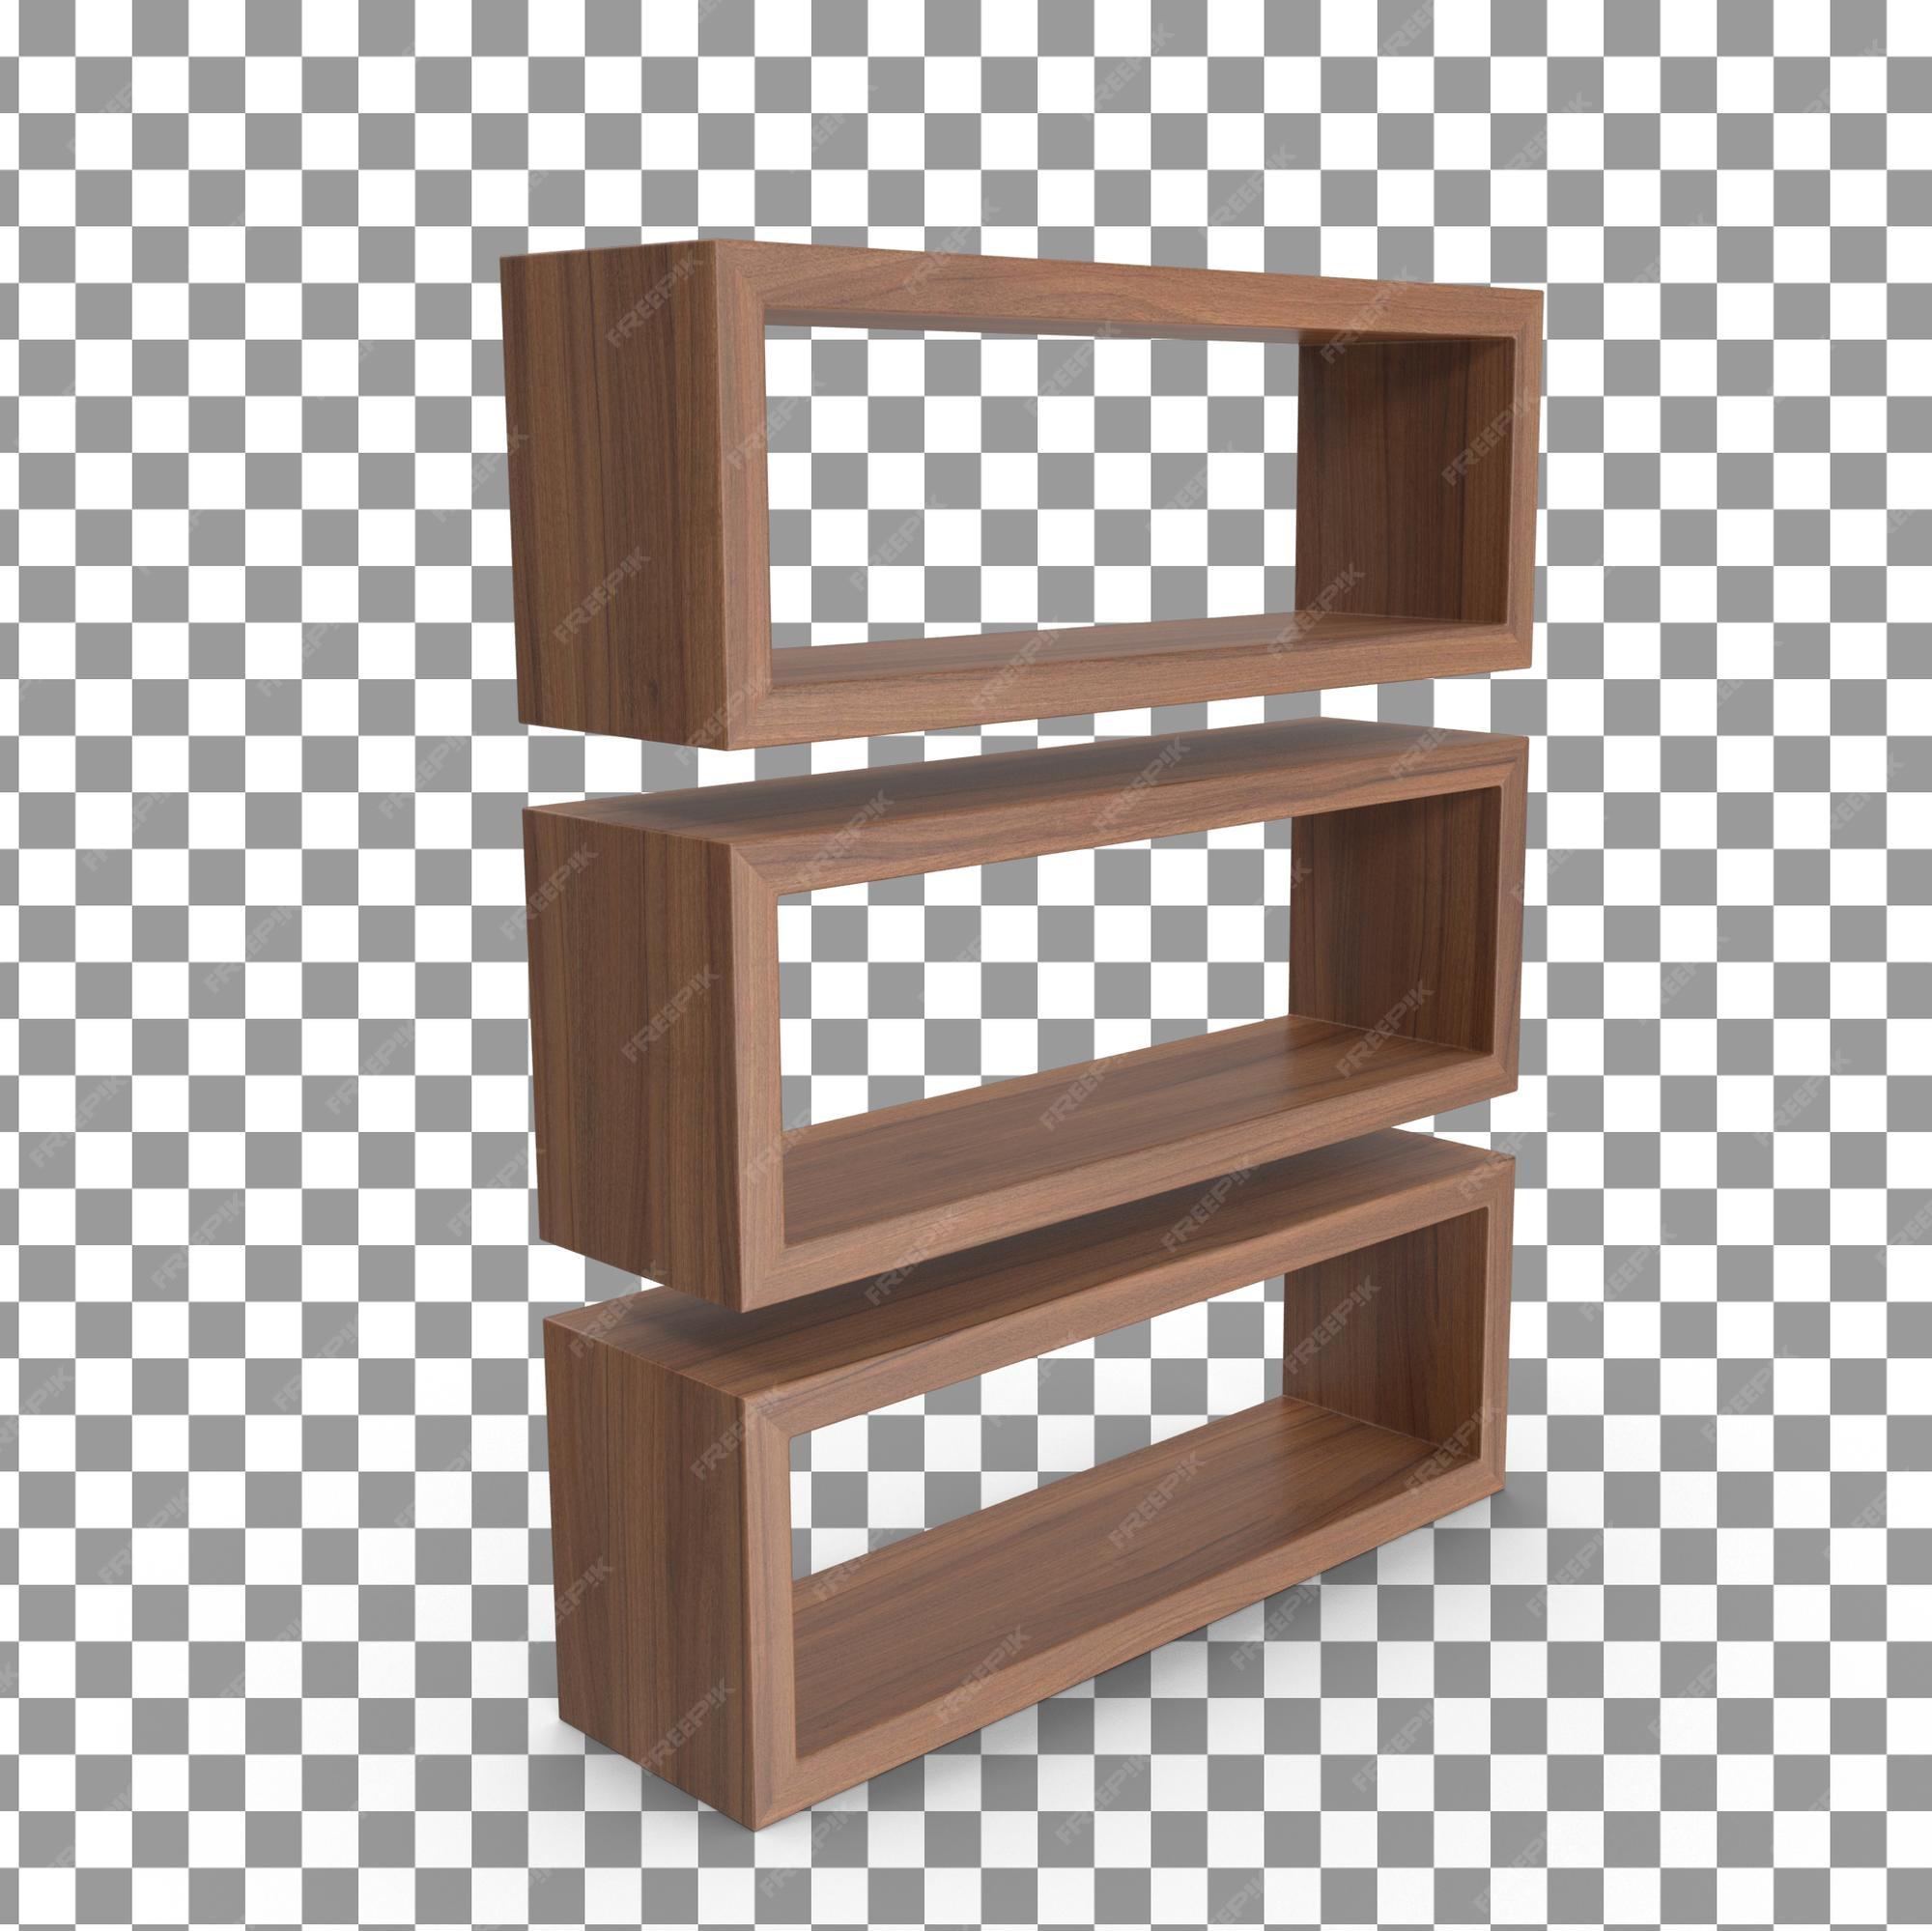 Premium Psd 3d Wood Shelf On Isolated And Transparent Background